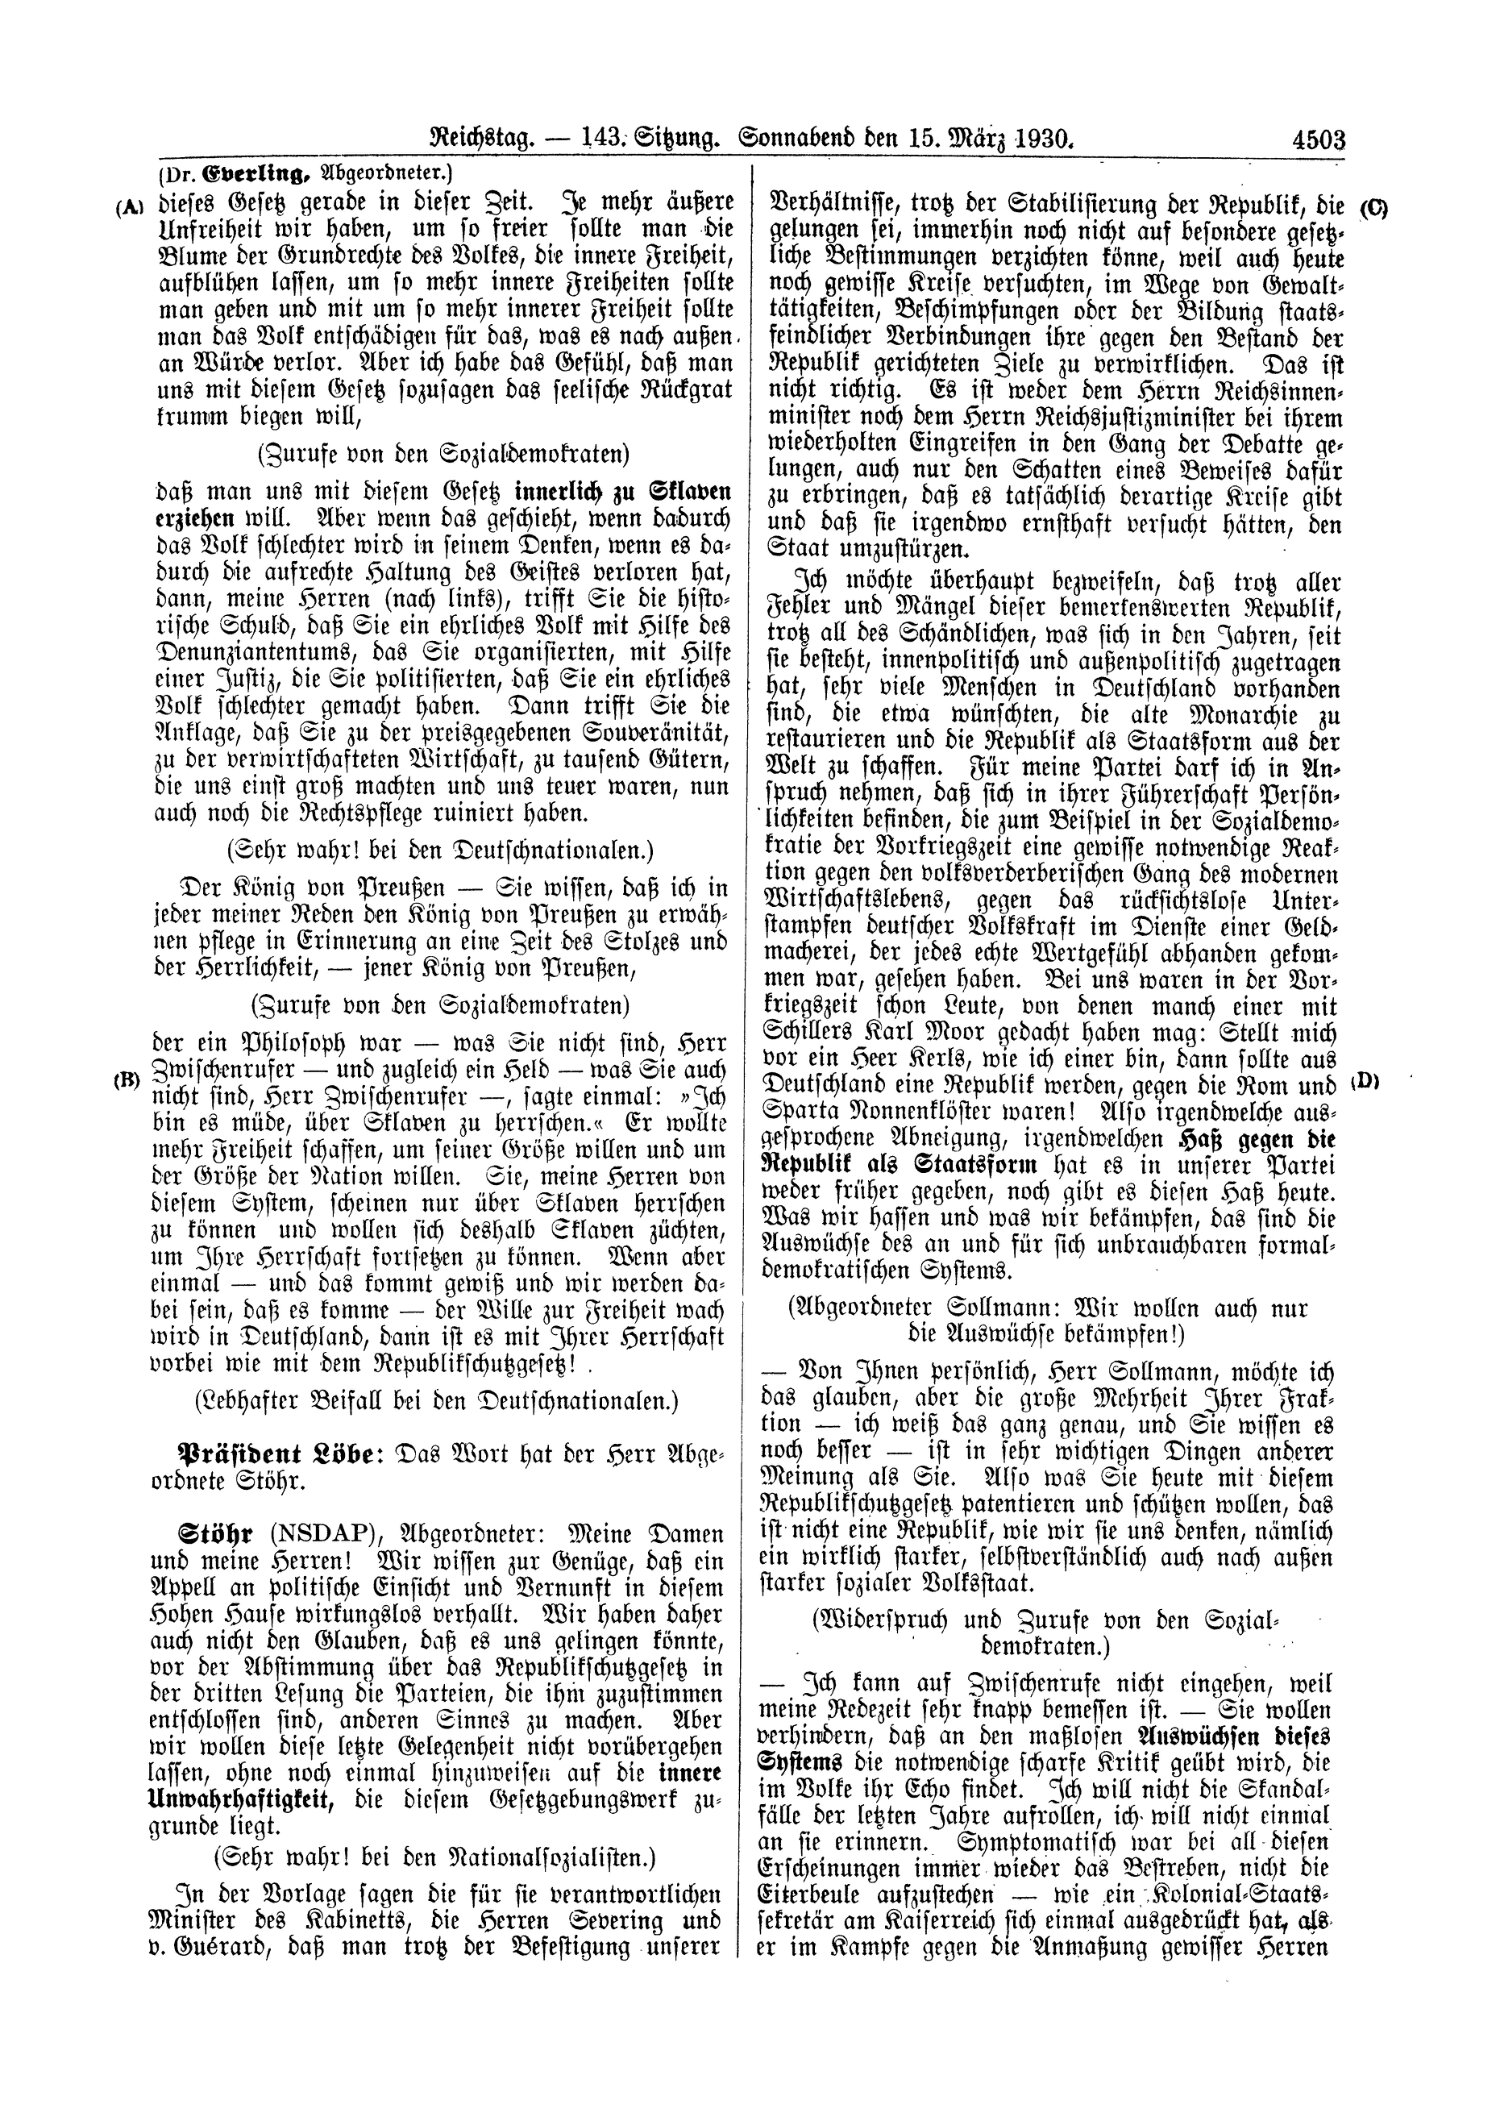 Scan of page 4503